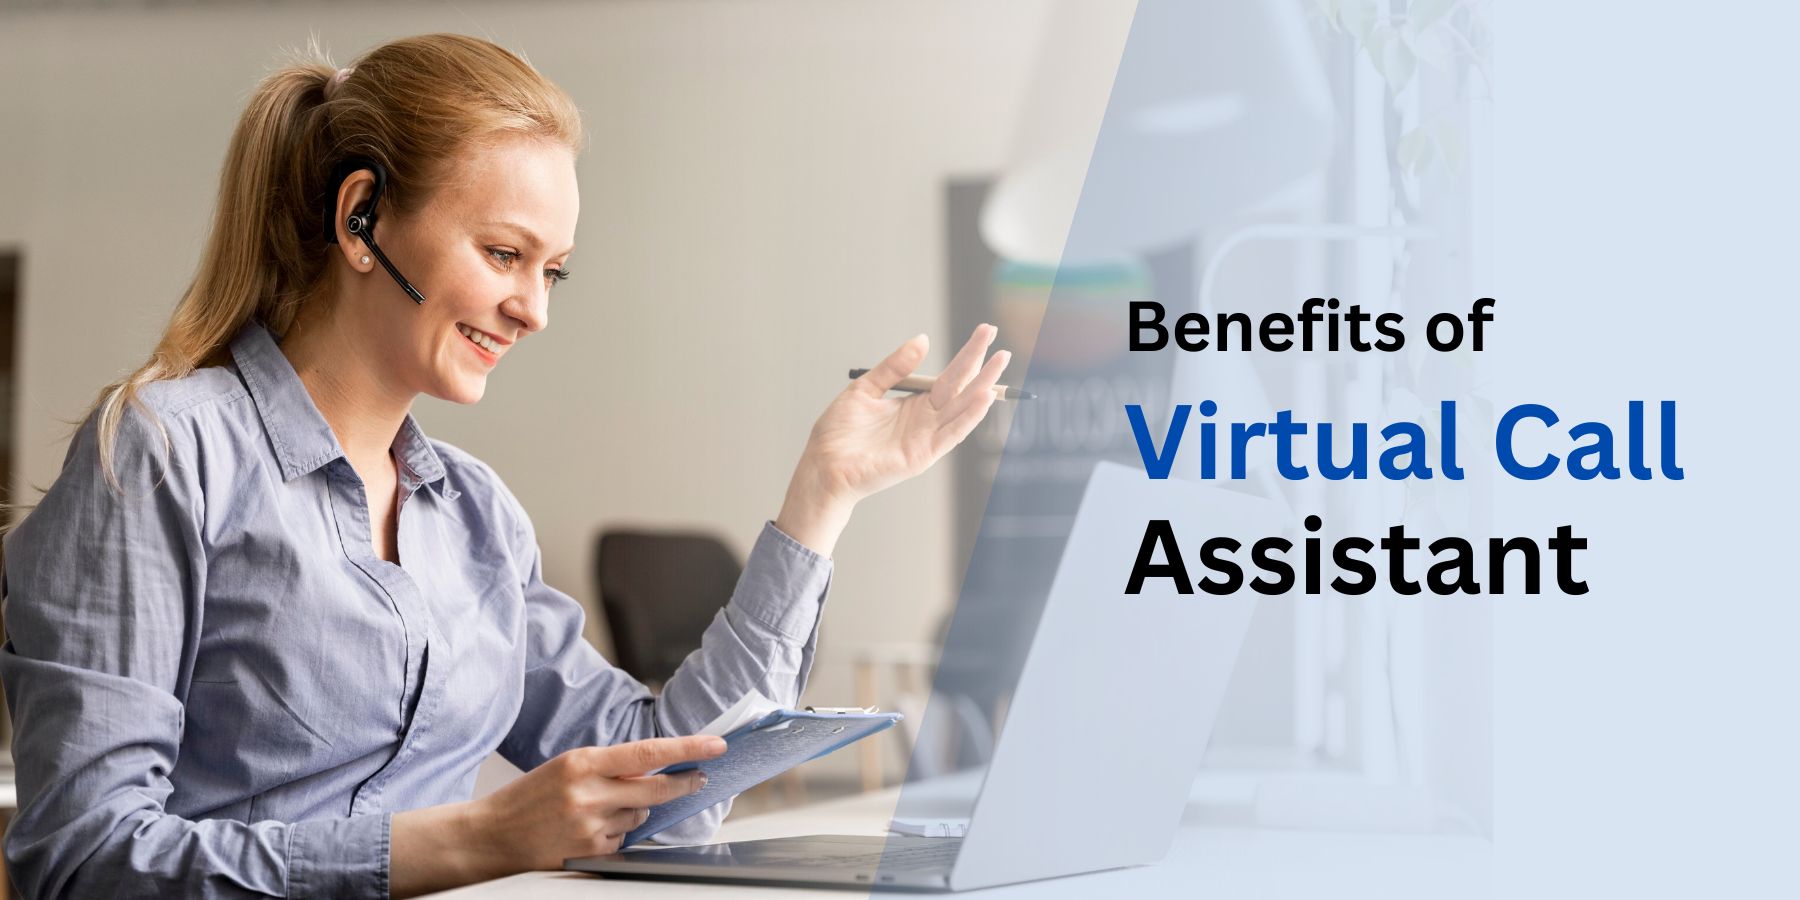 Benefits of Virtual Call Assistant